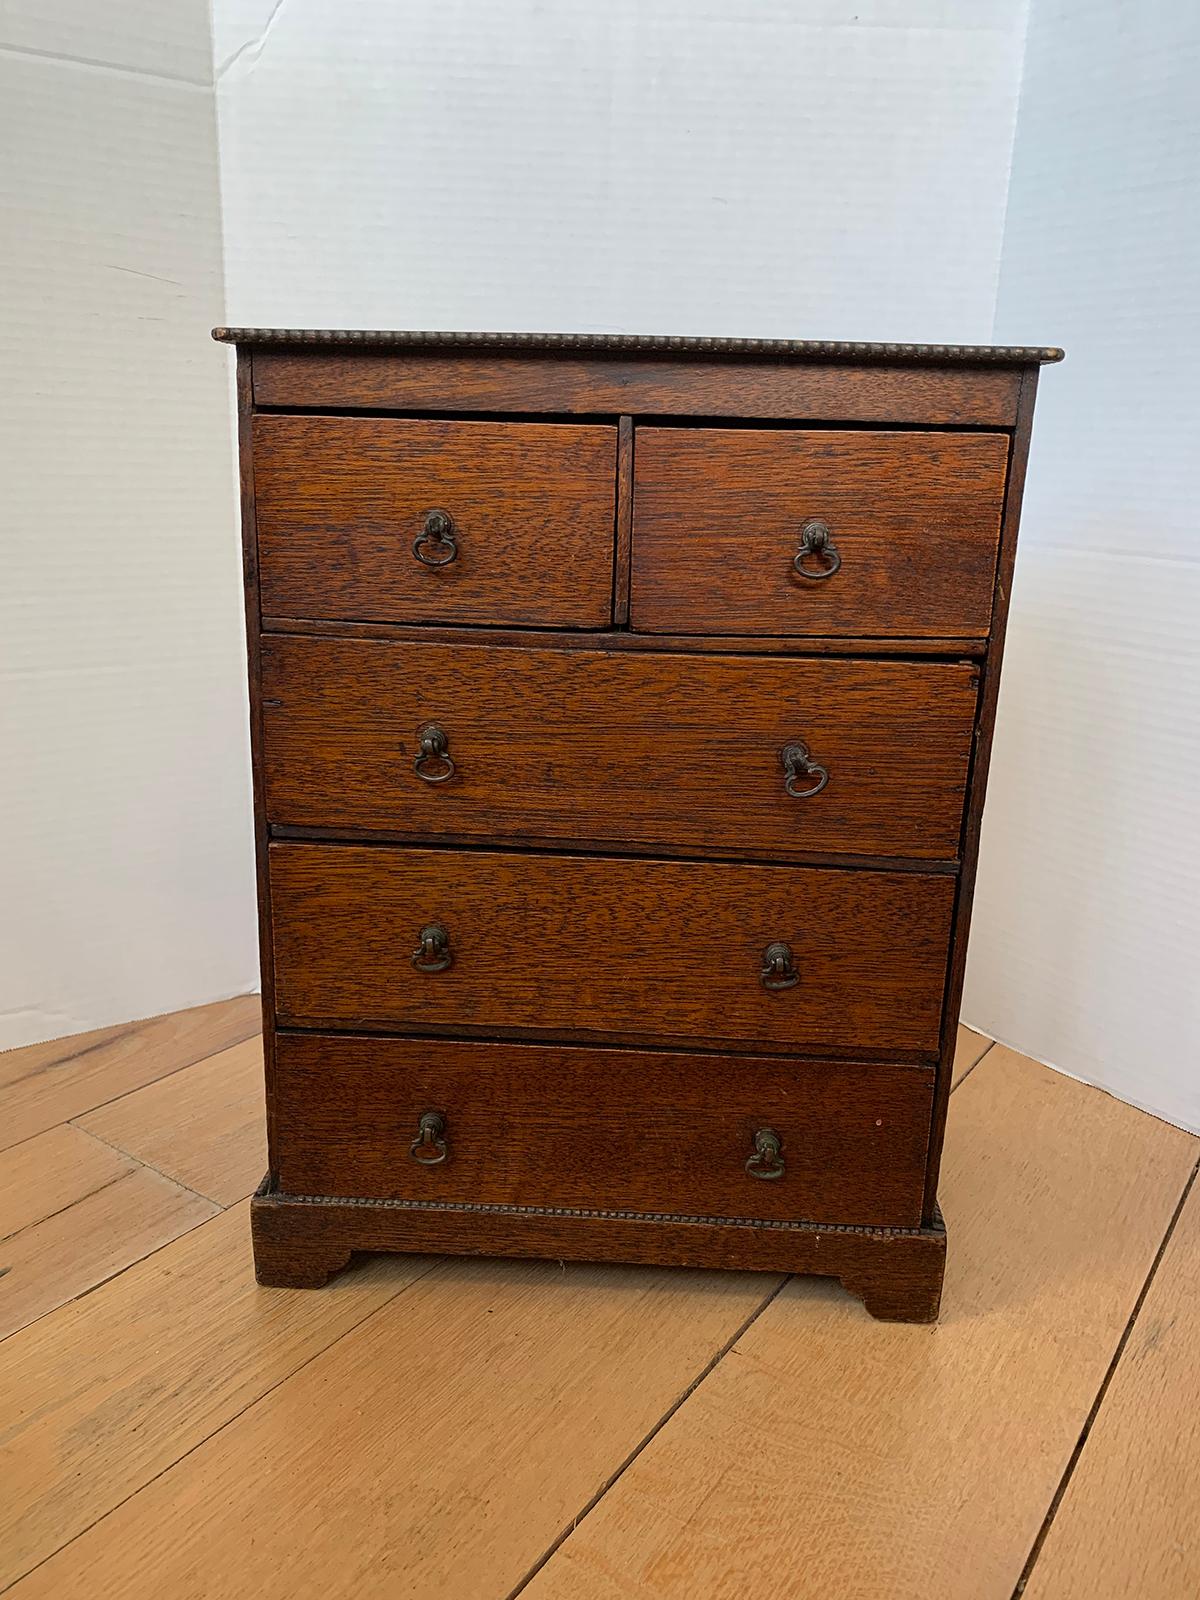 19th century miniature American oak chest with five drawers
Small, accessory size. Likely used as a model for traveling salesmen.